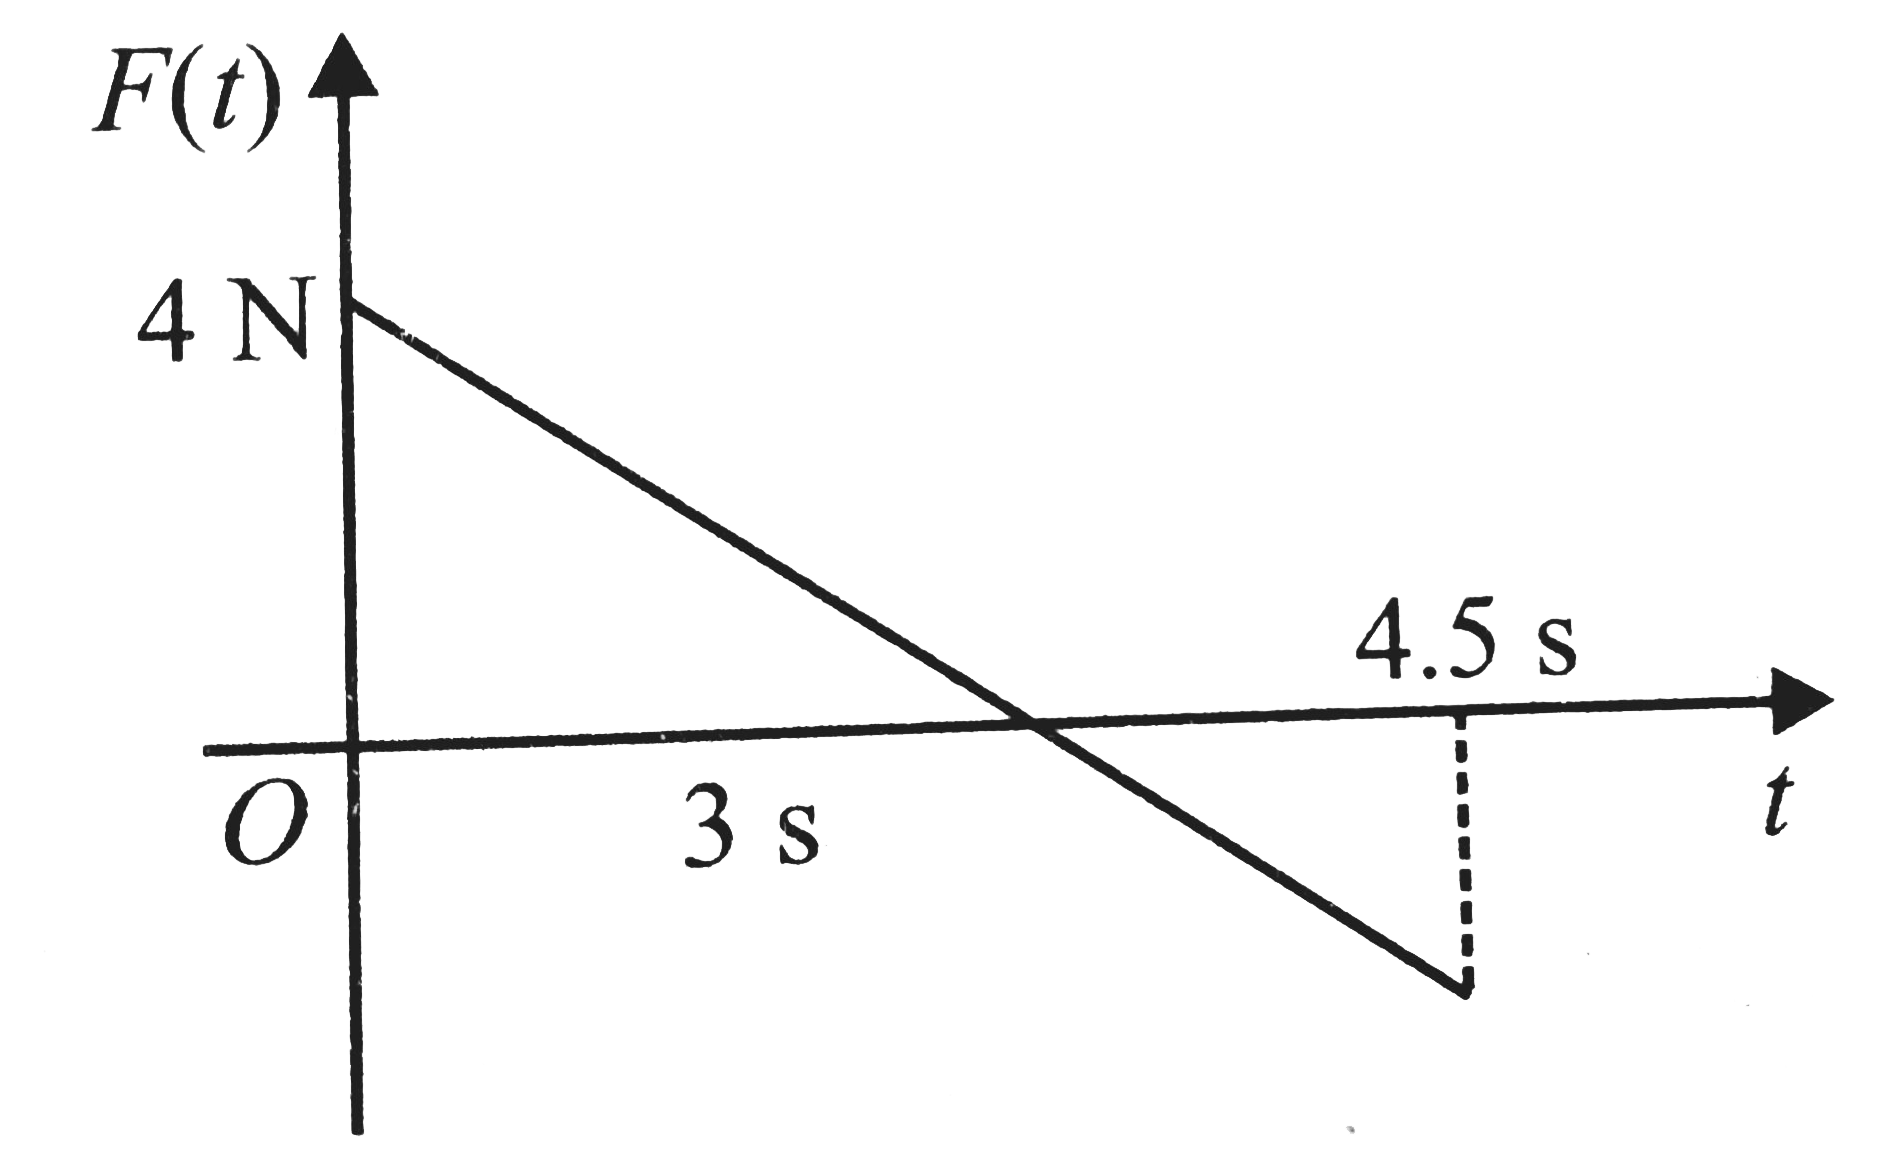 A block of mass 2 kg is free to move along the x-axis. It at rest and from t = 0onwards it is subjected to a time-dependent force F(t) in the x direction. The force F(t) varies with t as shown in the figure. The kinetic energy of the block after 4.5 seconds is